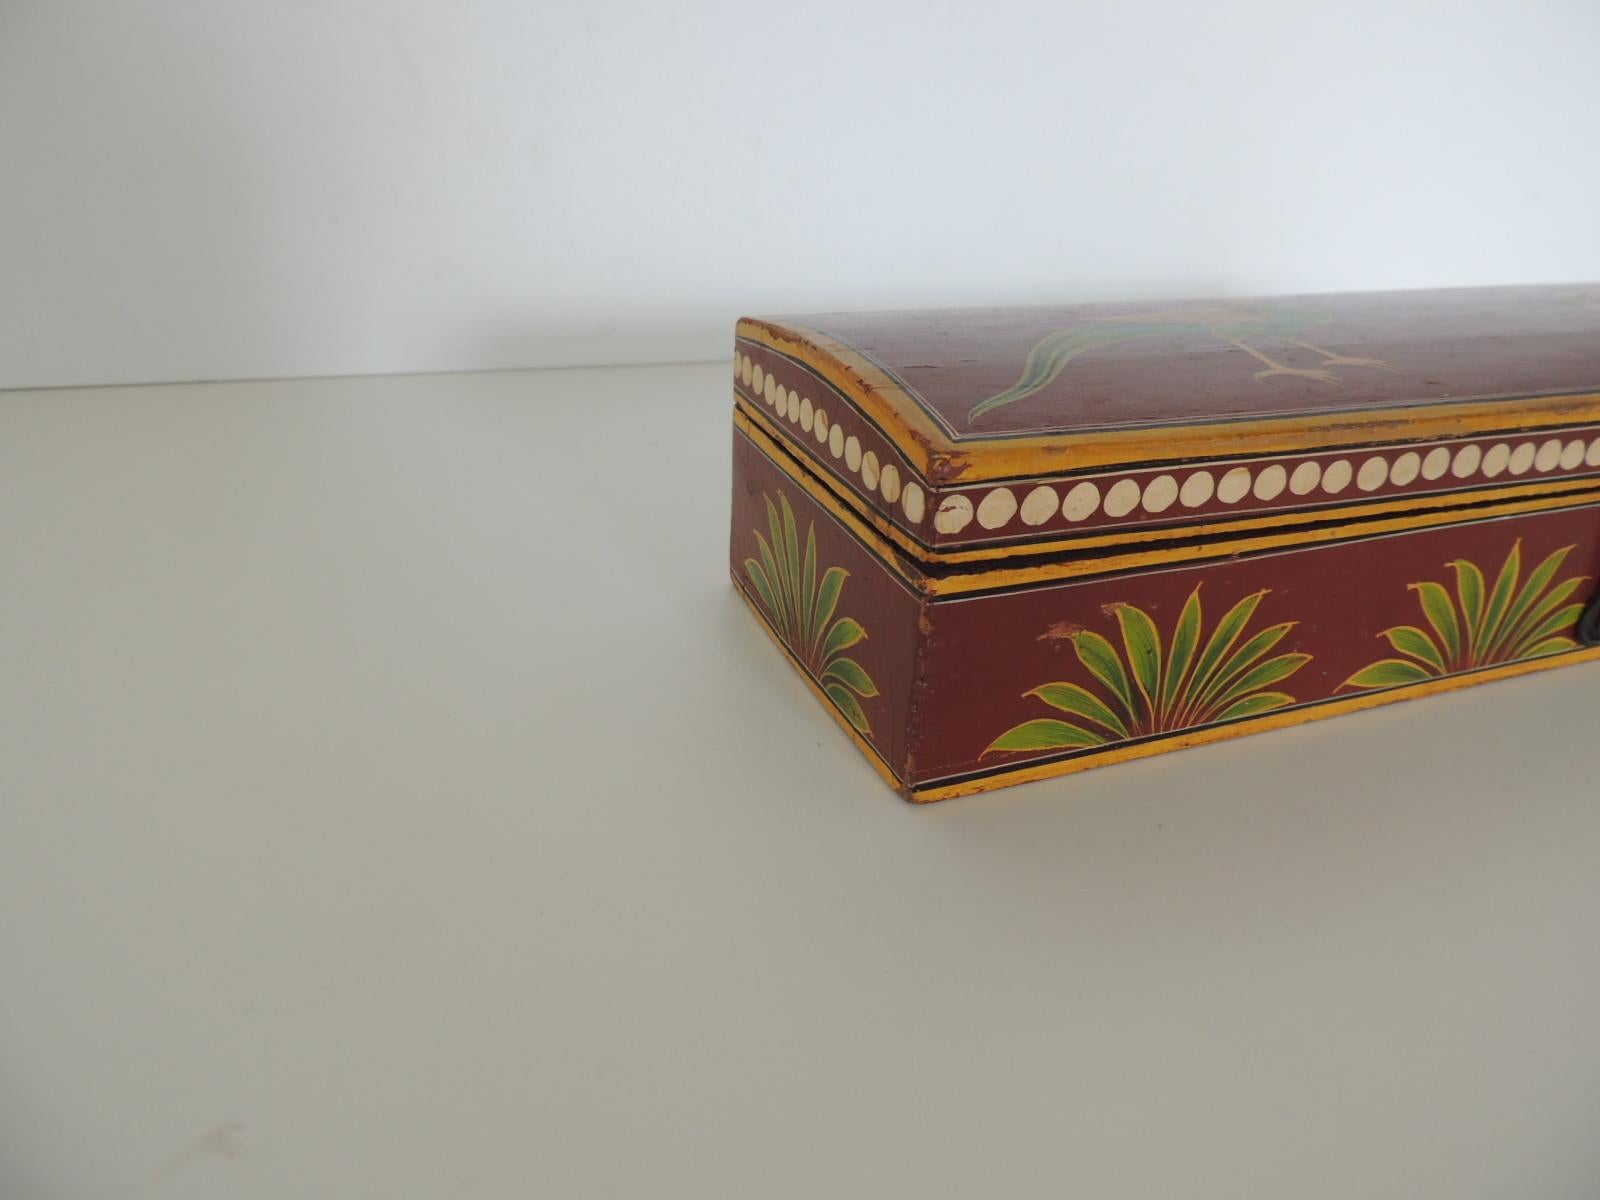 Vintage lacquered pen box depicting birds and palm trees.
Hand painted on all sides in shades of green, yellow, red, white and black.
Three compartments inside, forged metal clasp.
Size: 12